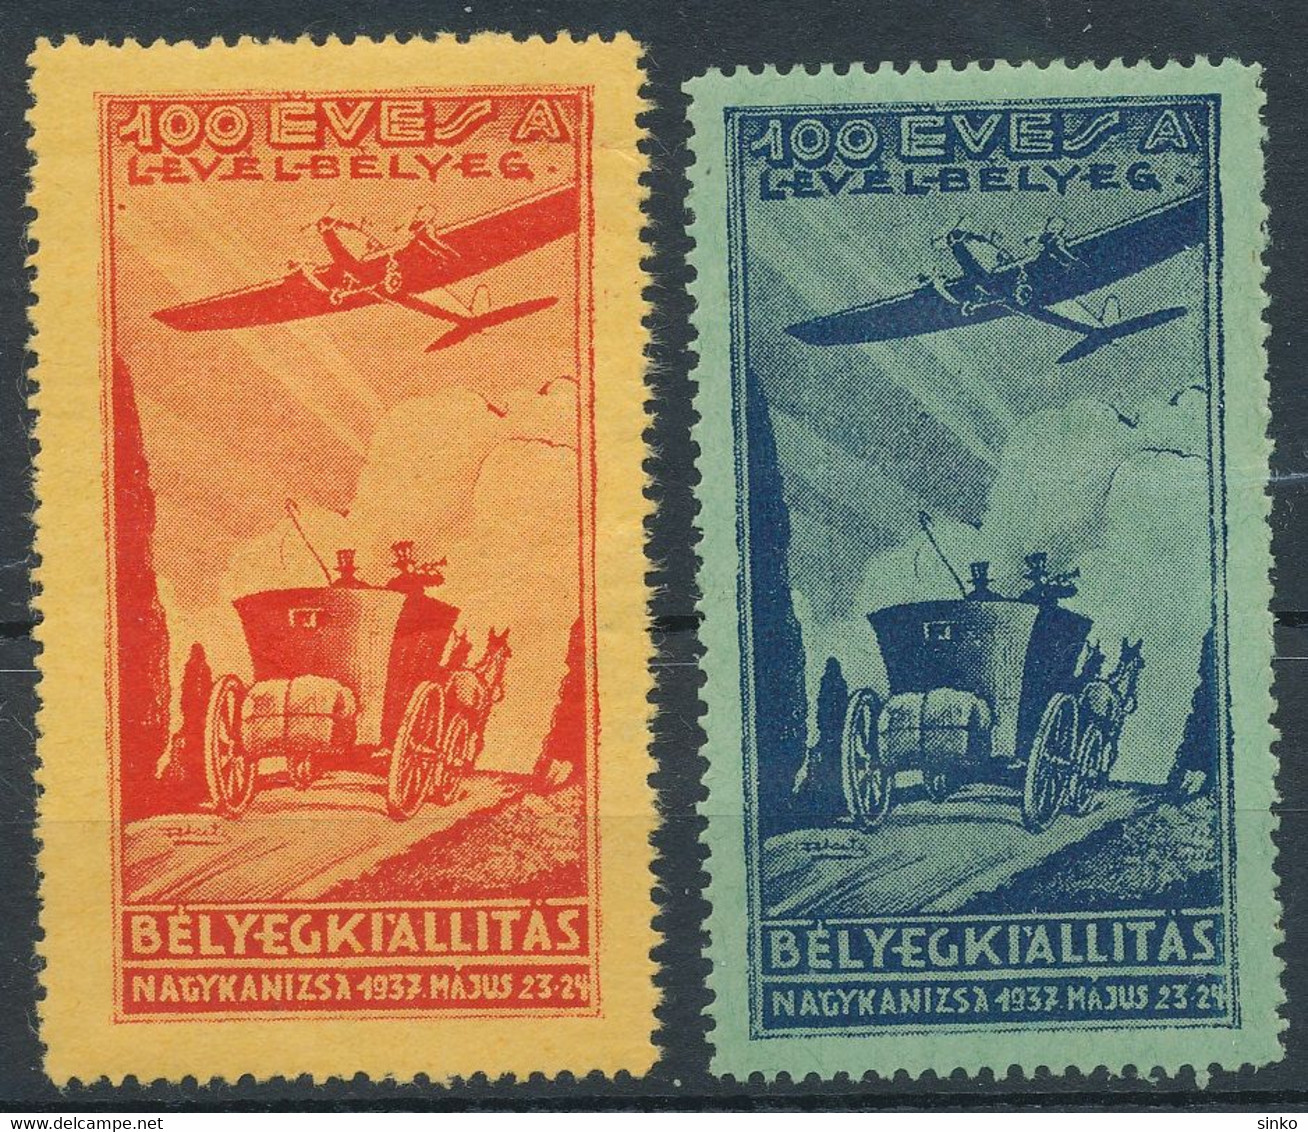 1937. First Stamp Exhibition In Nagykanizsa - Commemorative Sheet - Commemorative Sheets